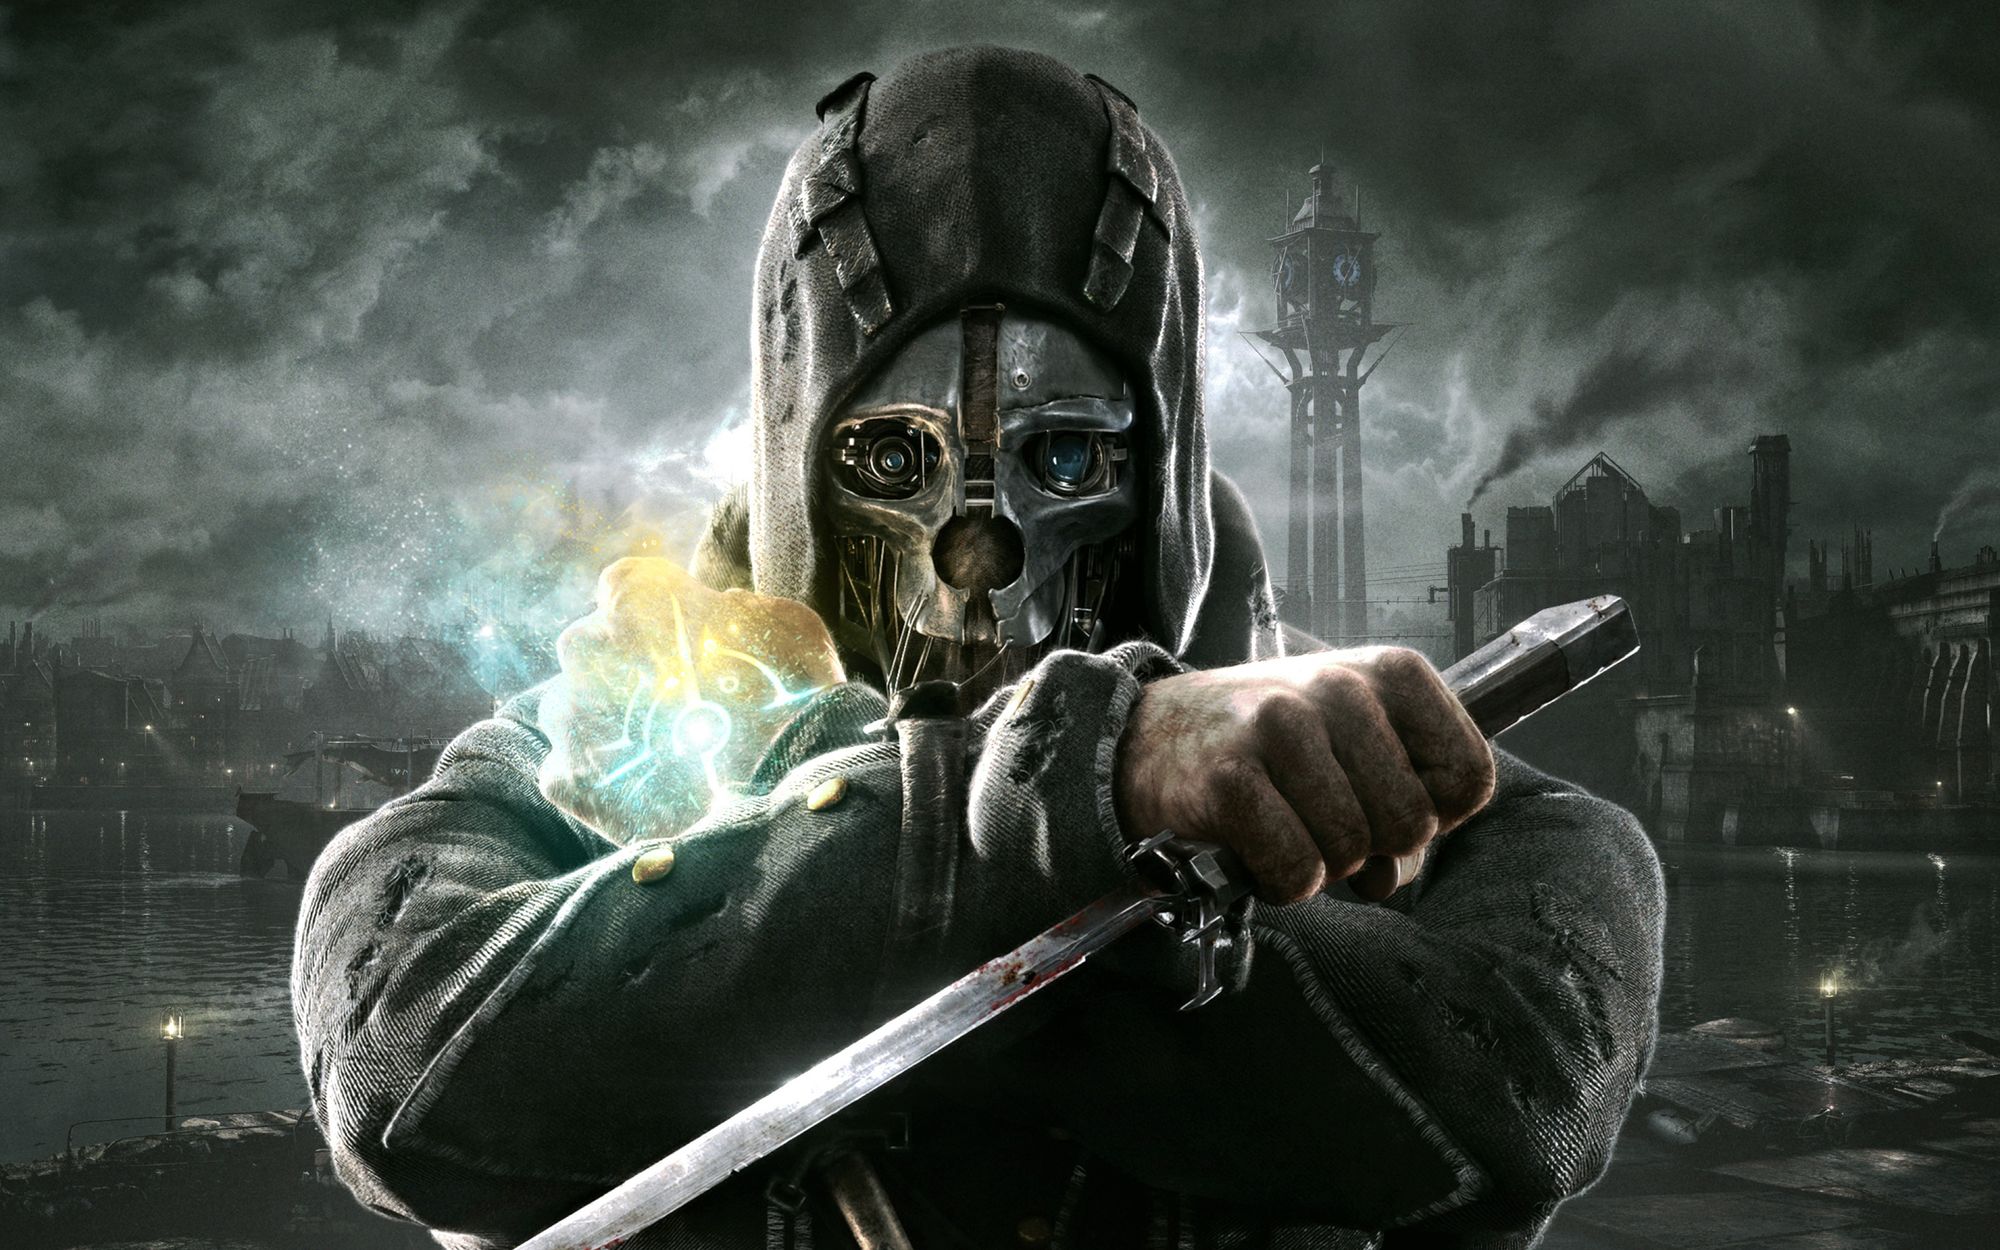 Every Level in Dishonored, Ranked